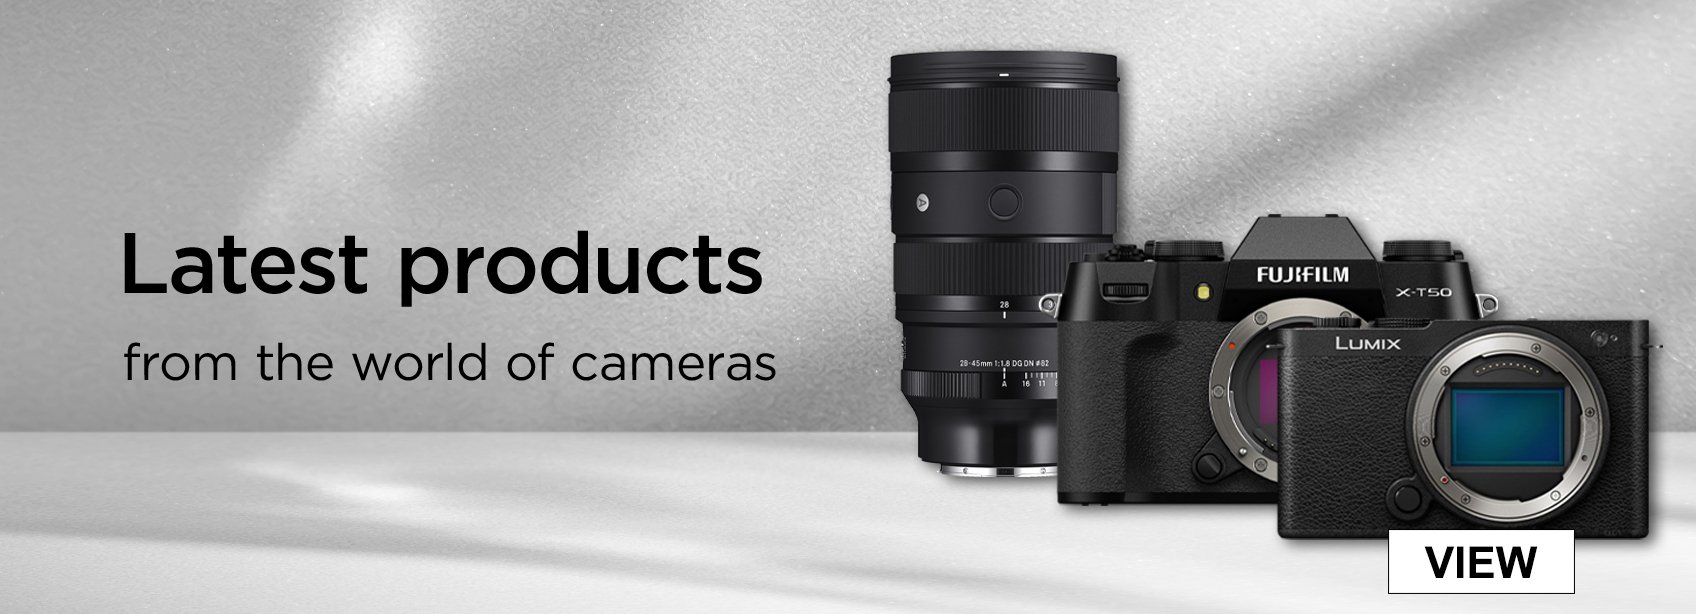 Latest products from the world of cameras